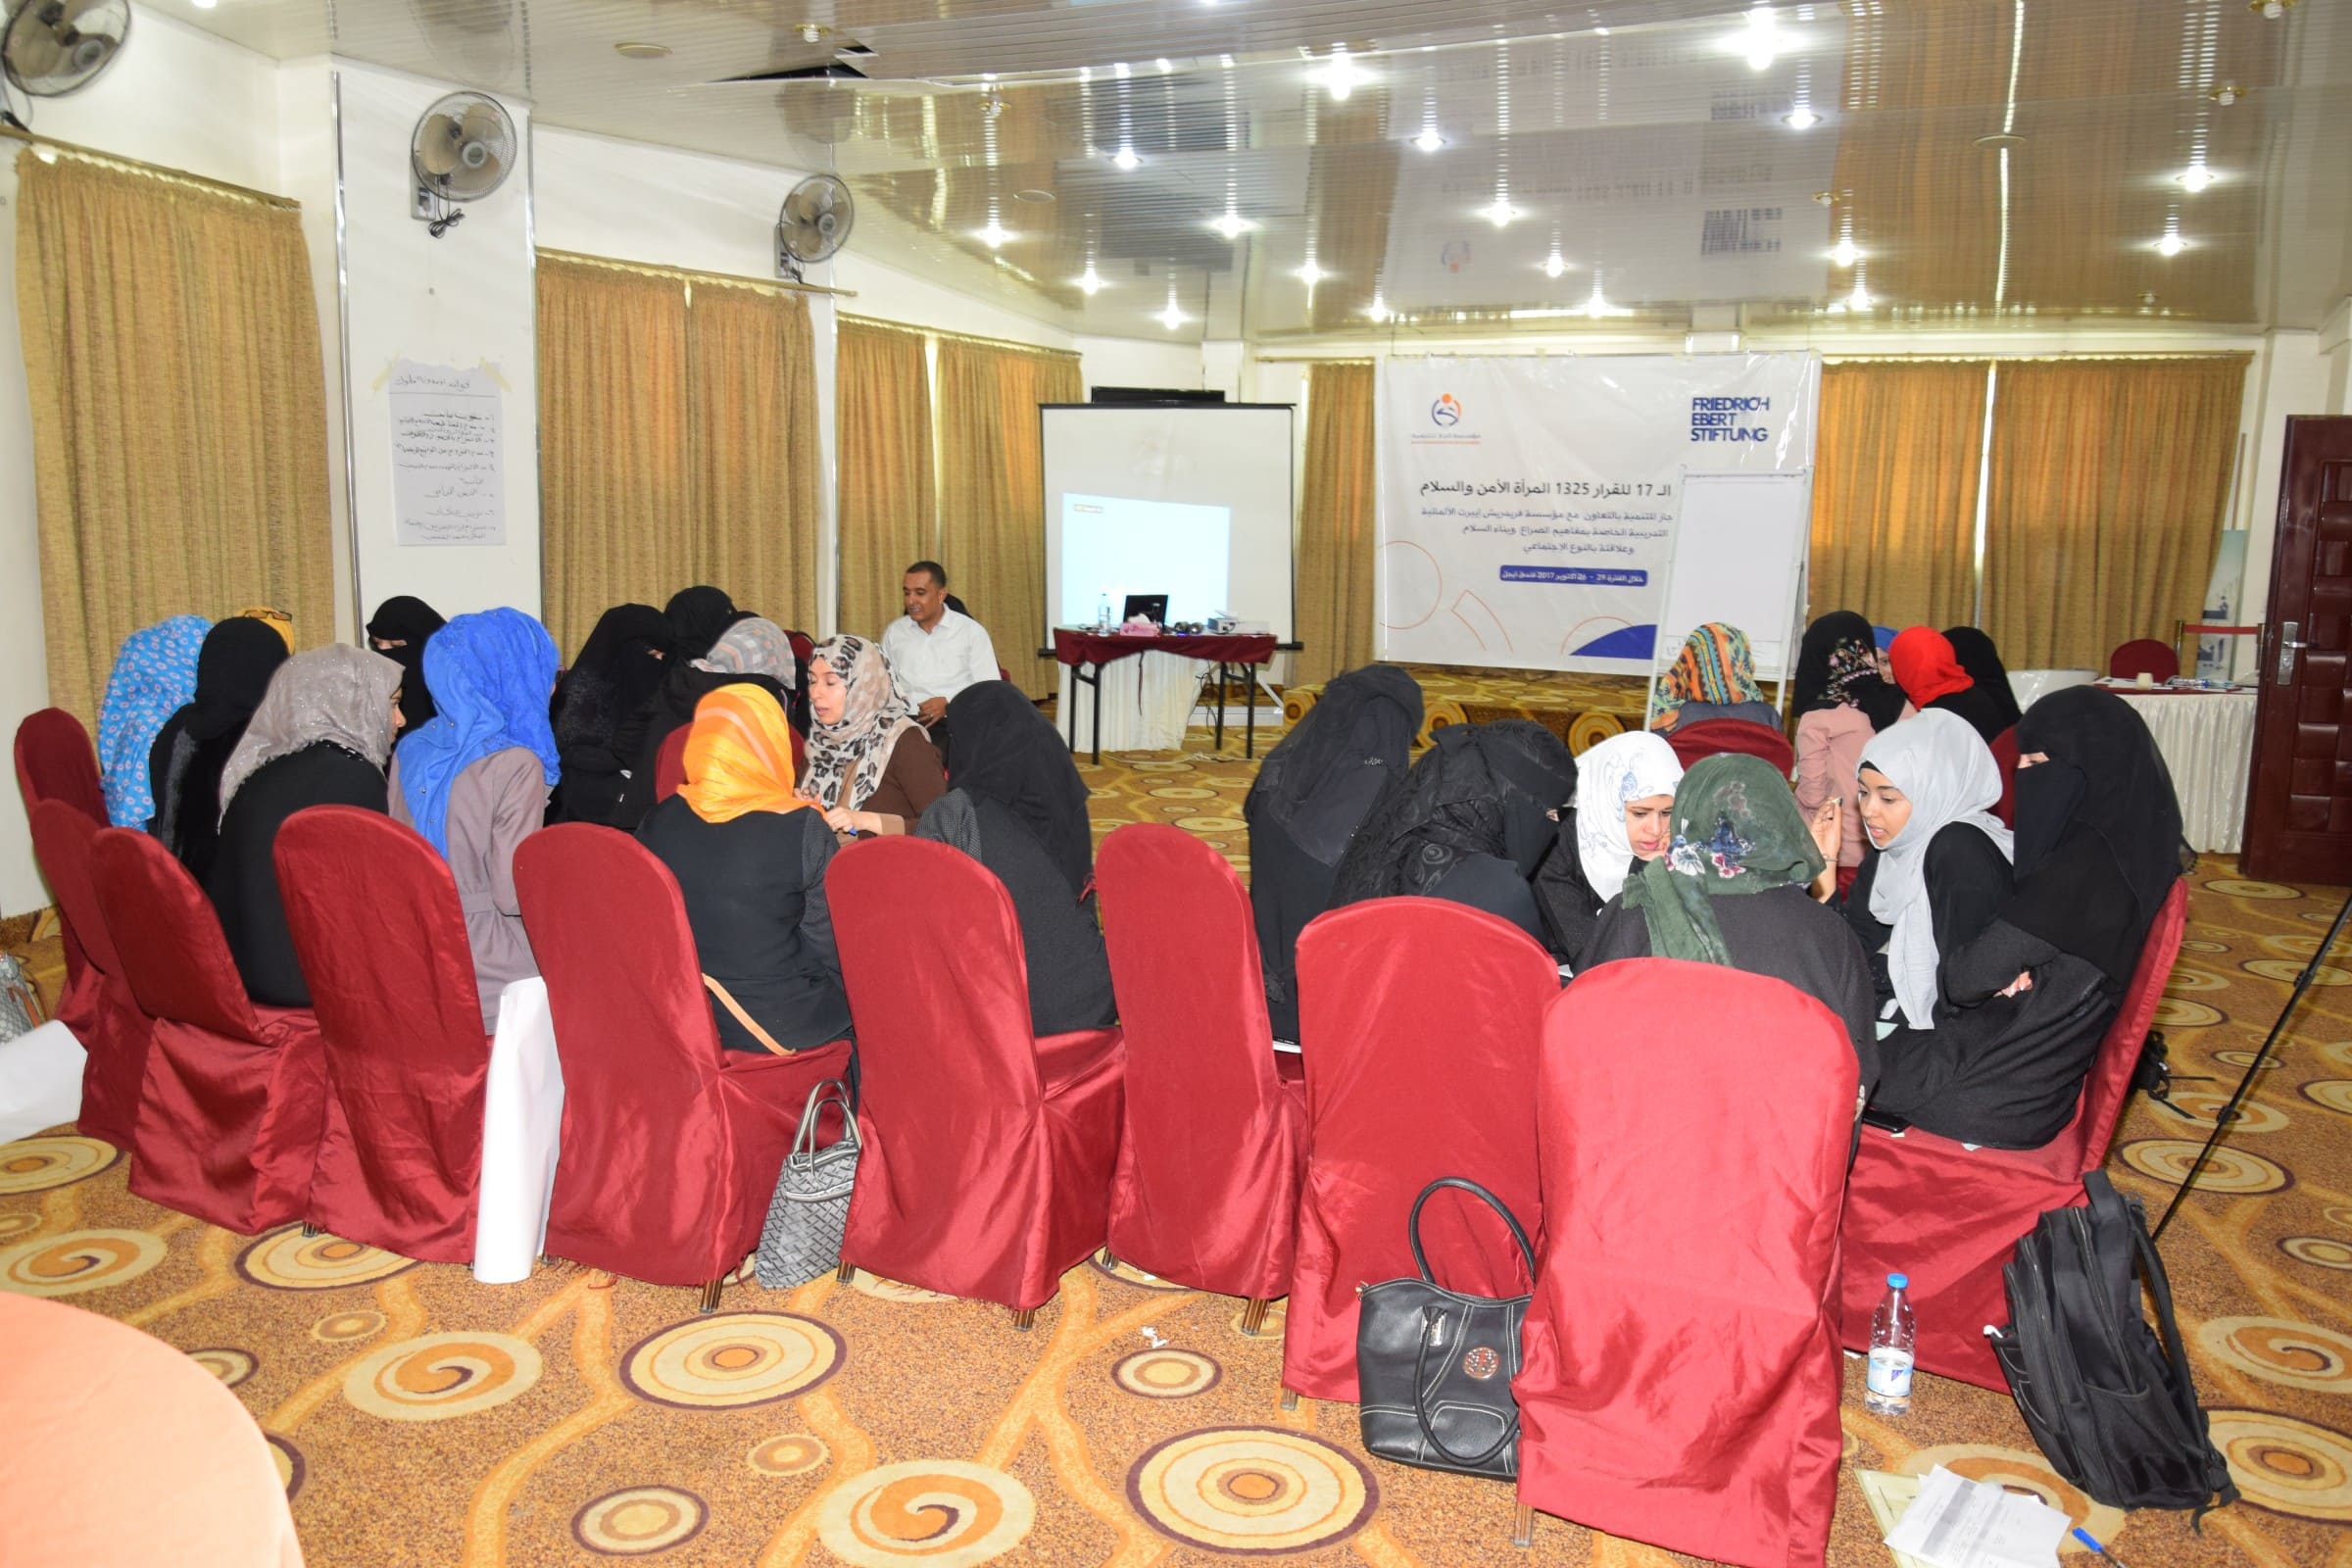 The training program: concepts of conflict and peace building and their relationship to gender